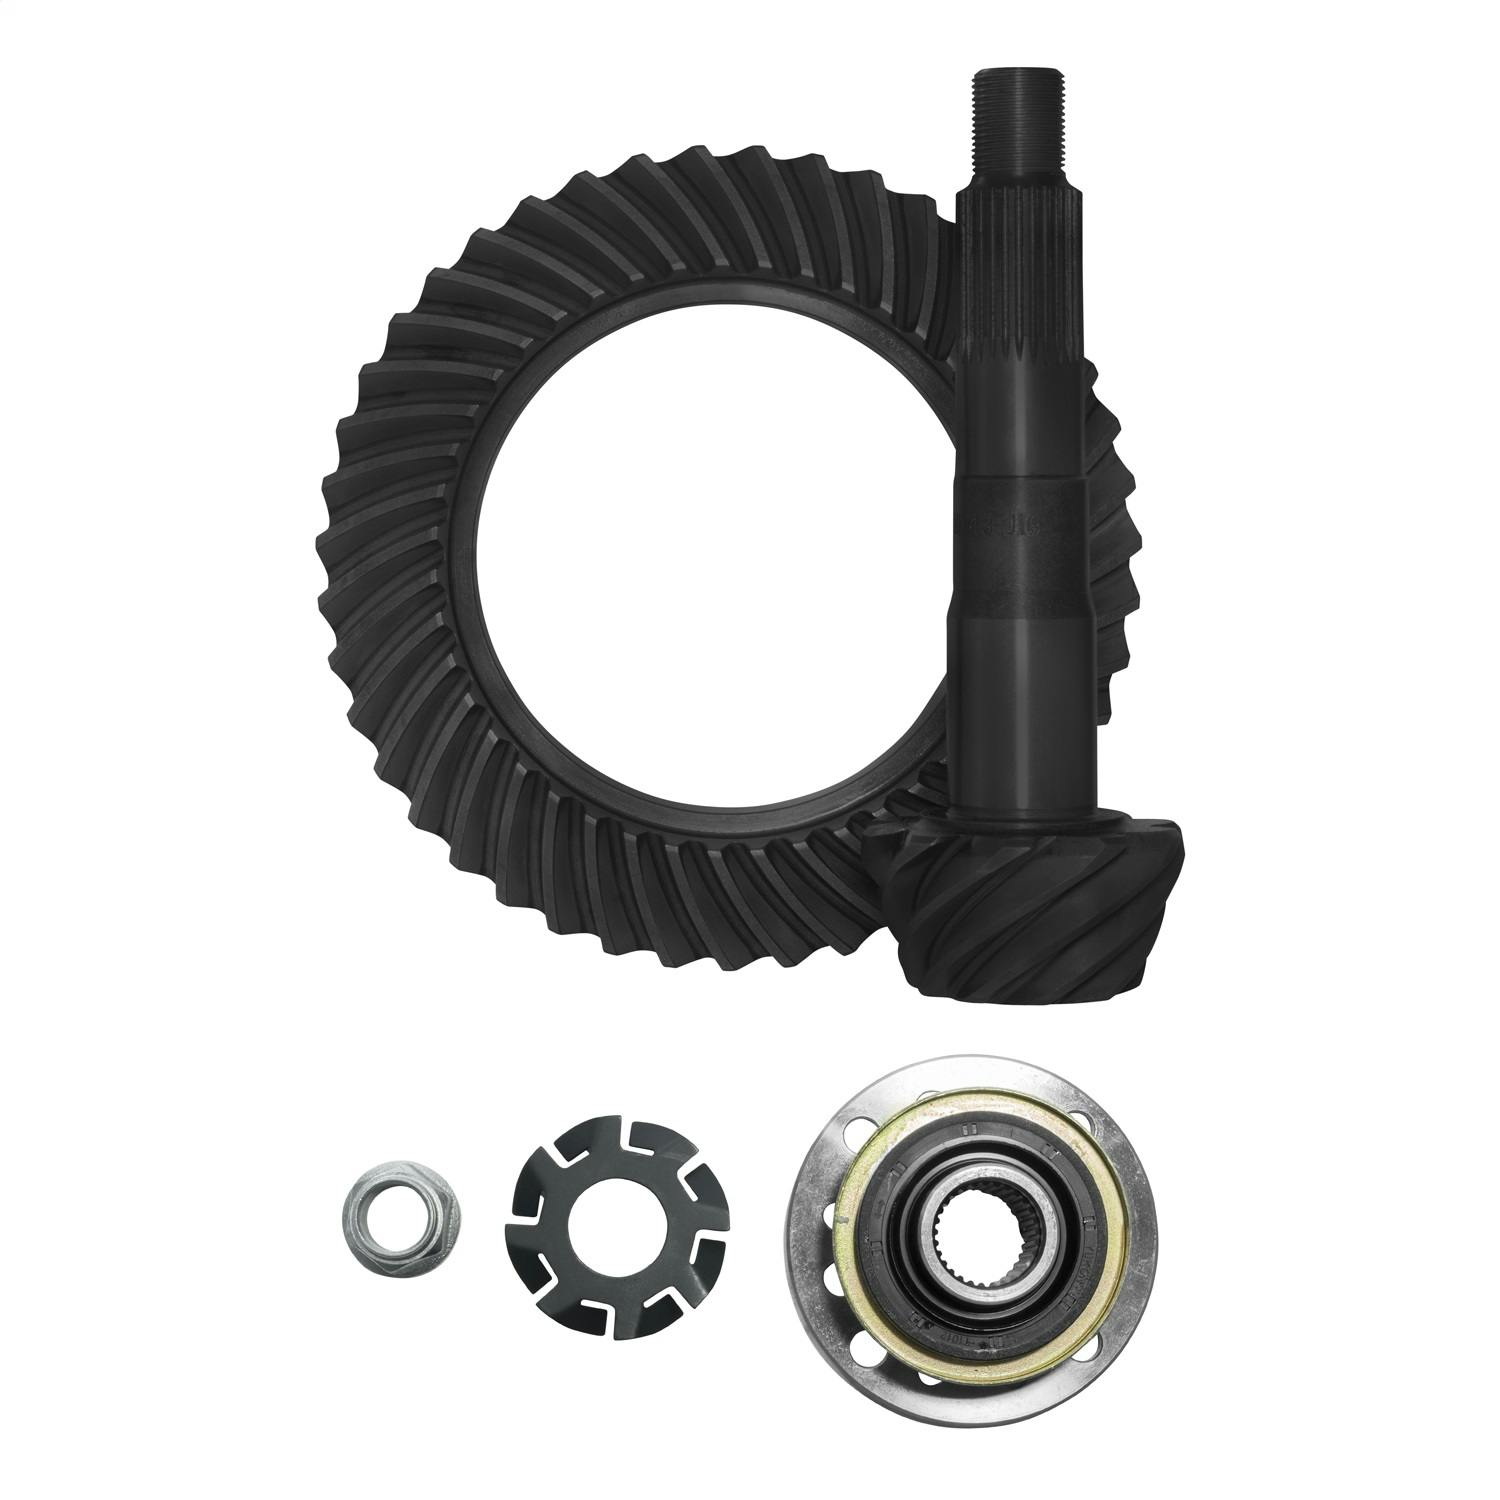 USA Standard Gear ZG TLCF-411RK Differential Ring and Pinion